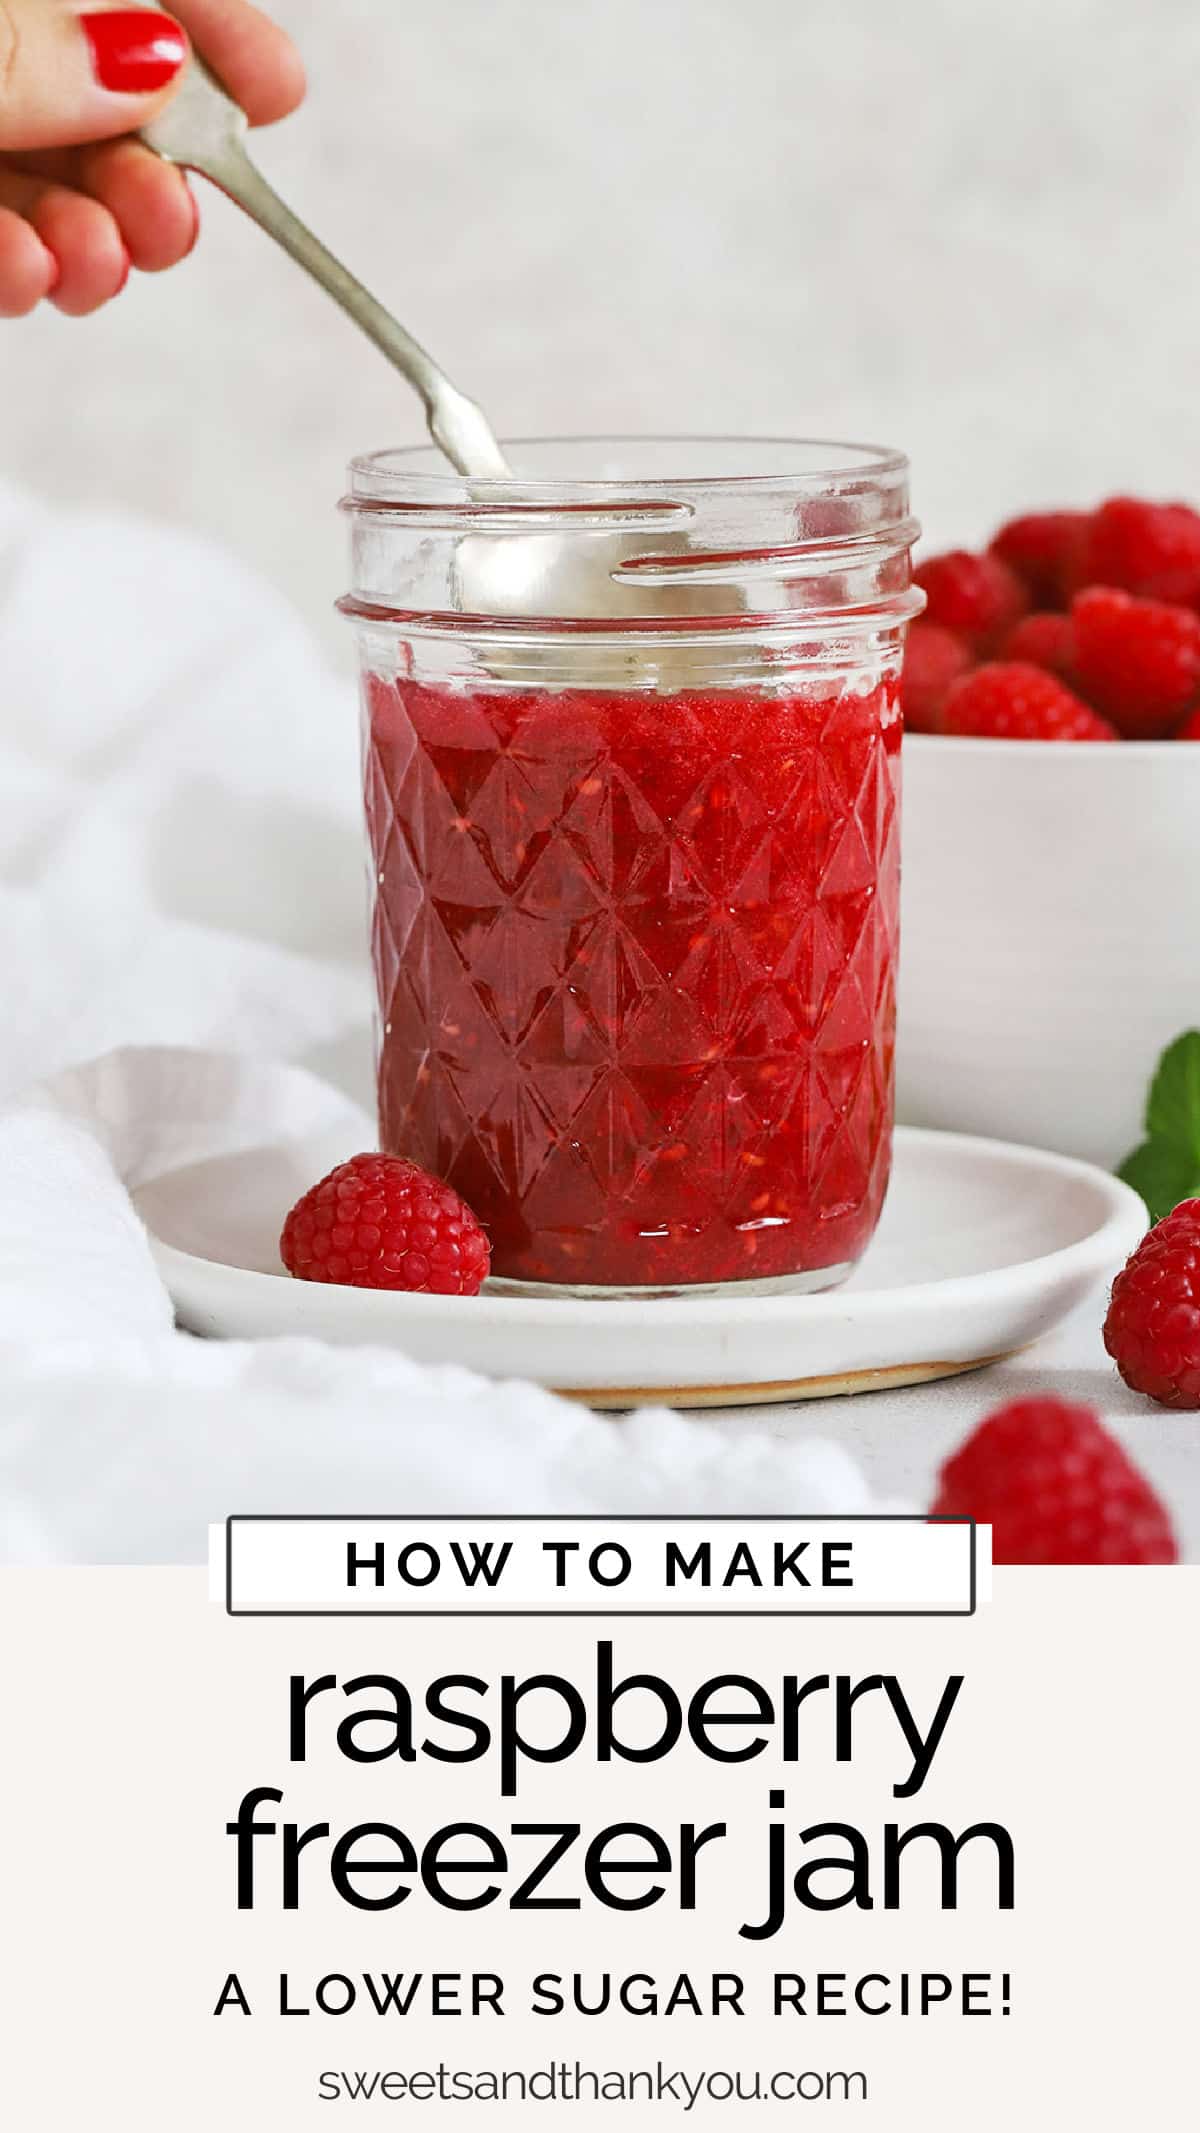 How To Make Low Sugar Raspberry Freezer Jam - This raspberry freezer jam recipe is easier than you think. Made with just 4 ingredients and no canning required! // homemade raspberry jam // homemade raspberry freezer jam recipe // easy freezer jam recipe // easy raspberry jam // low sugar raspberry jam recipe // reduced sugar raspberry jam recipe / low sugar raspberry freezer jam recipe / how to make raspberry freezer jam step by step /